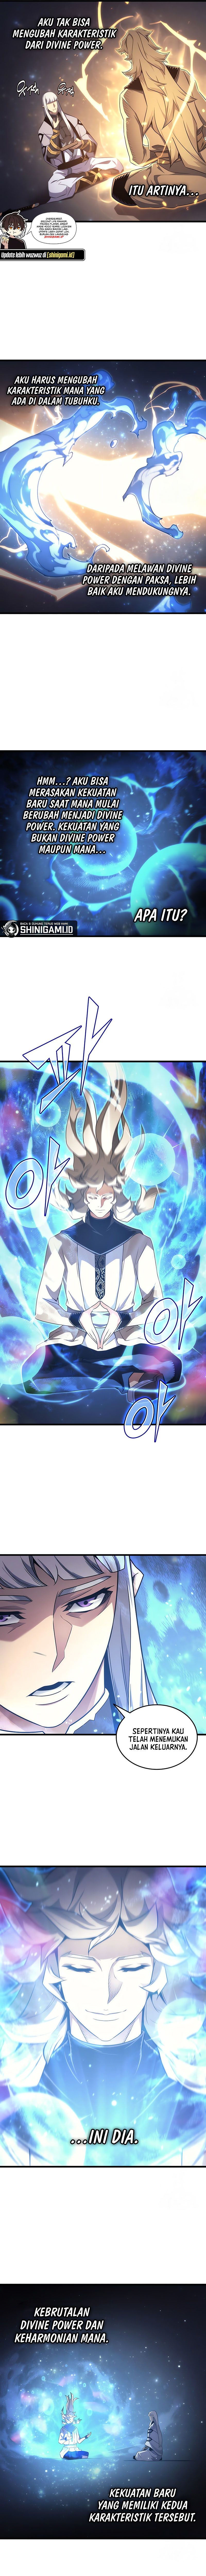 The Great Mage Returns After 4000 Years Chapter 159